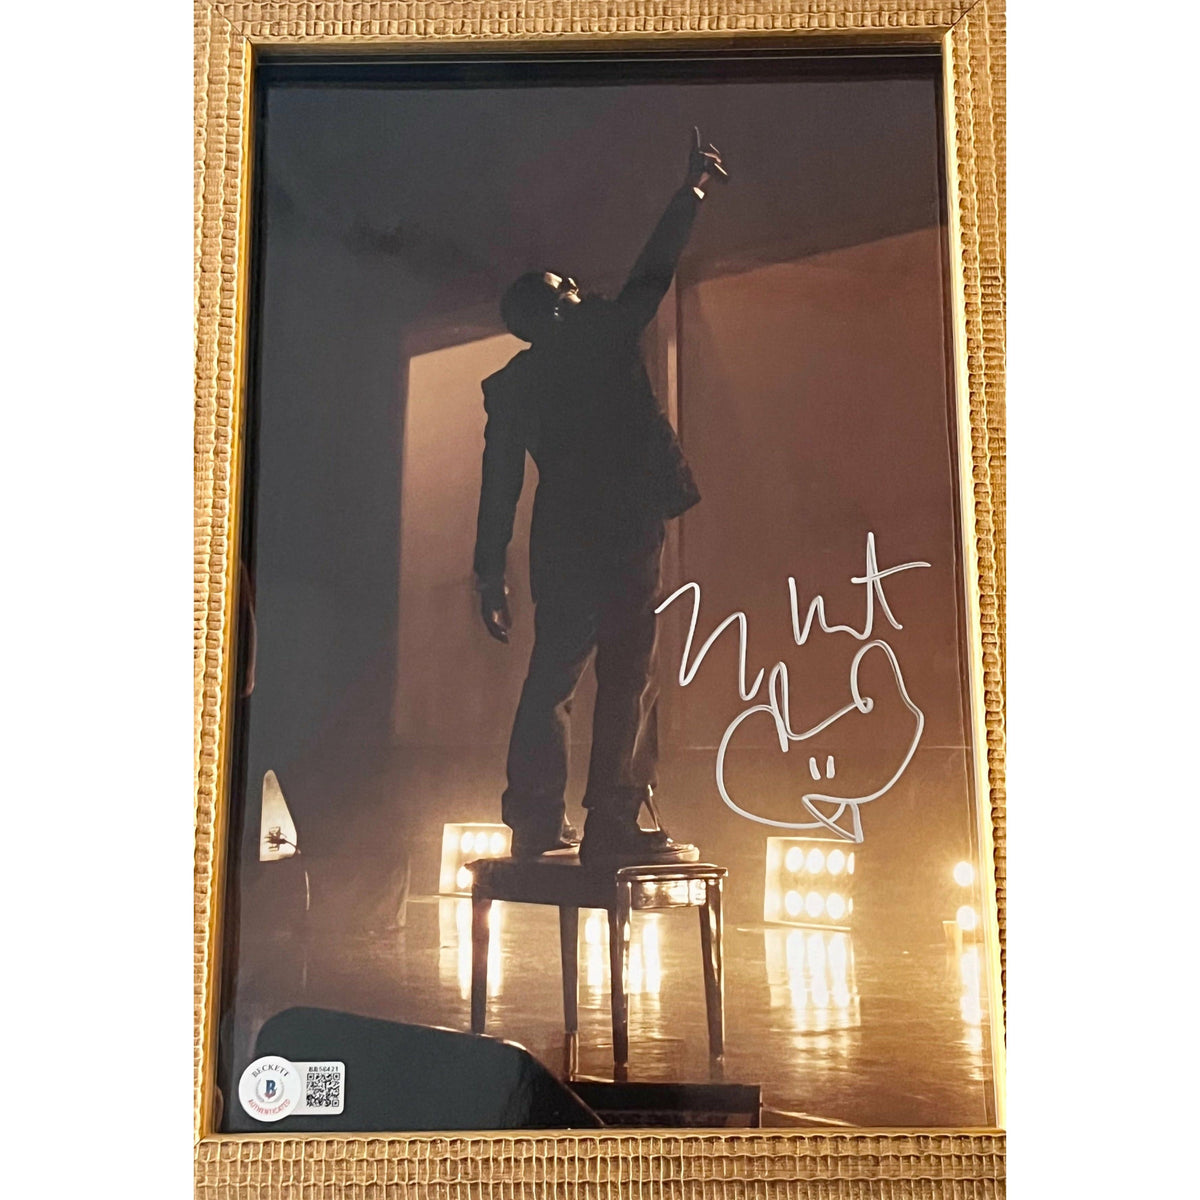 Kanye West - Autographed 8 x 10 Photo with Bear Sketch – MODCLAIR